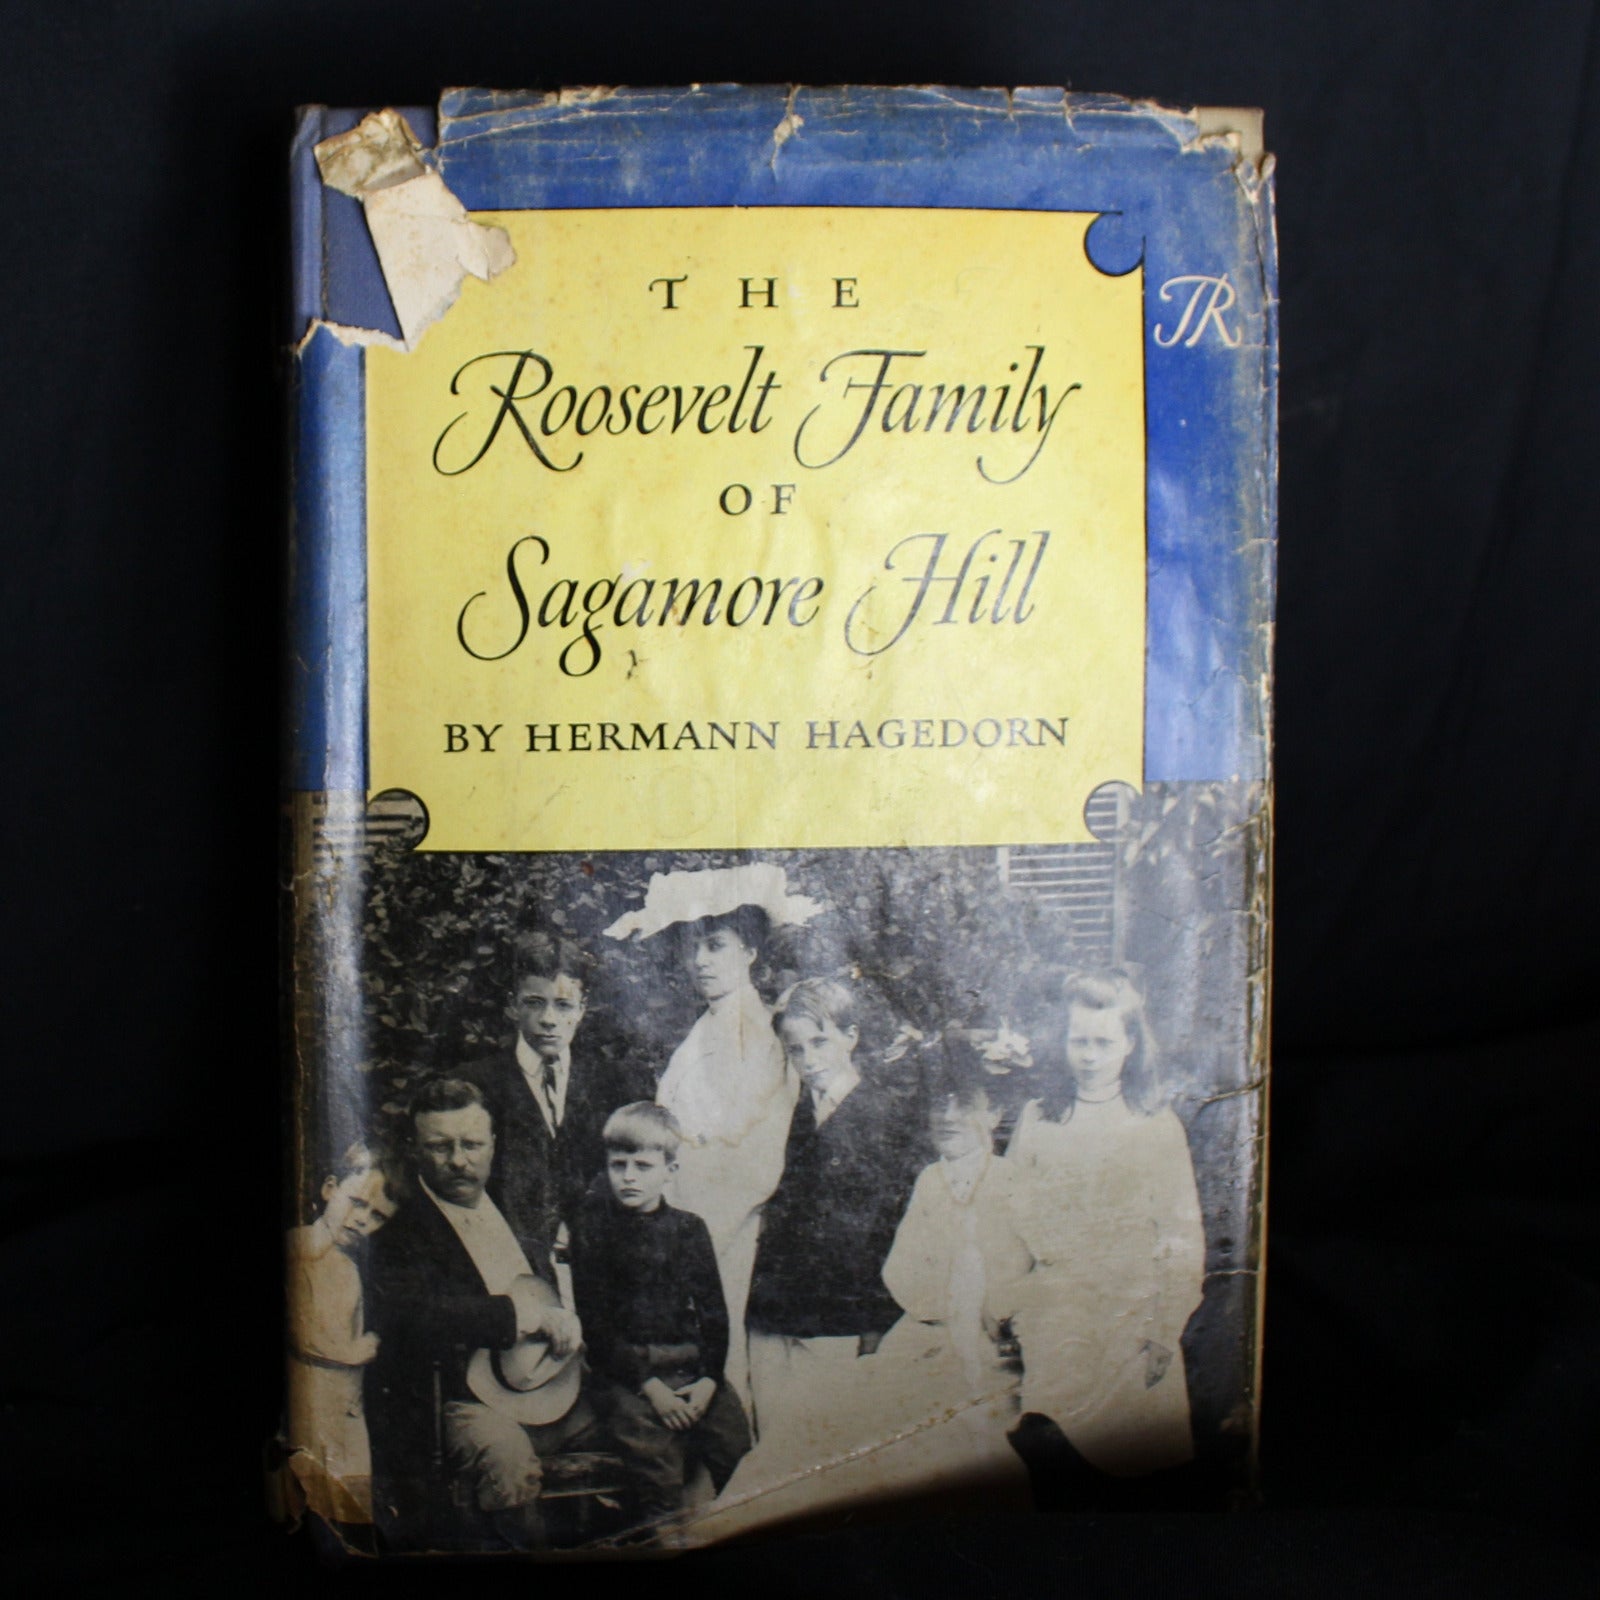 The Roosevelt Family of Sagamore Hill by Hermann Hagedorn, First Edition 1954